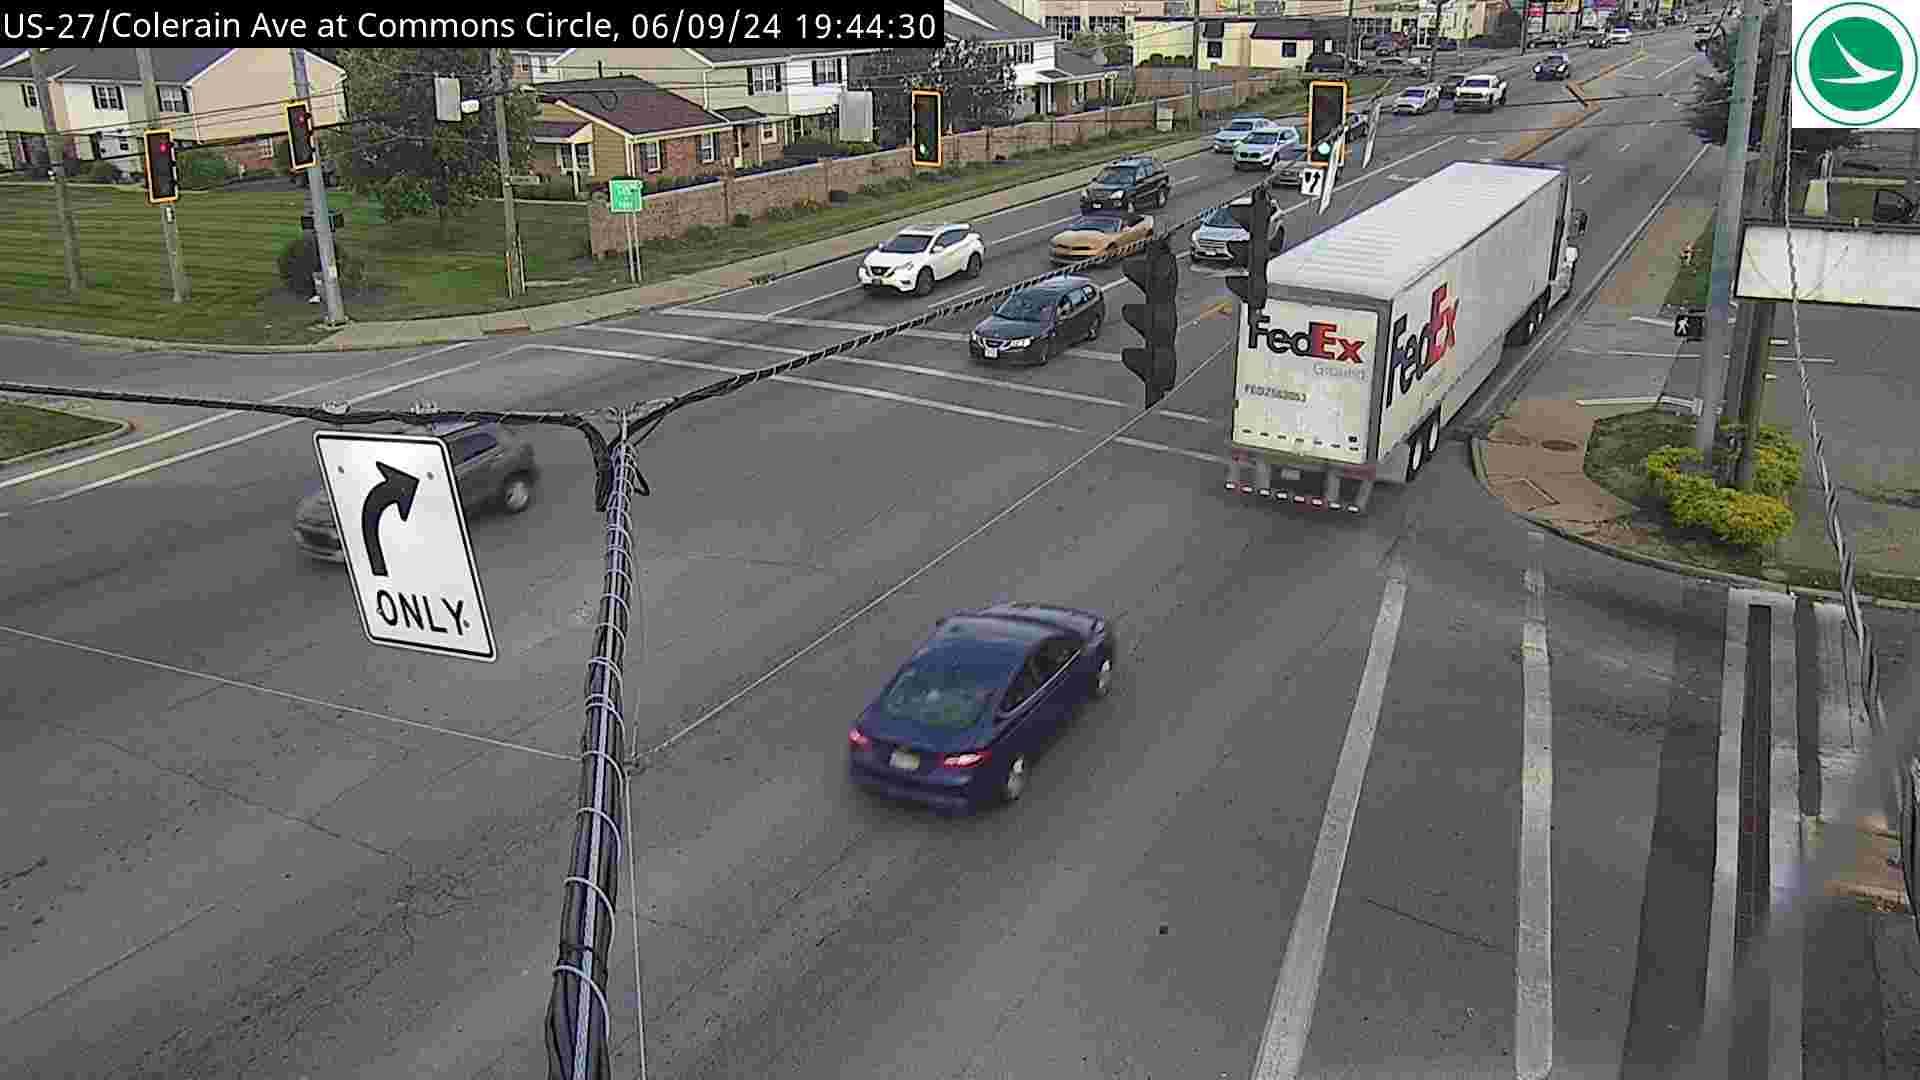 Traffic Cam Colerain Heights: US-27/Colerain Ave at Commons Circle